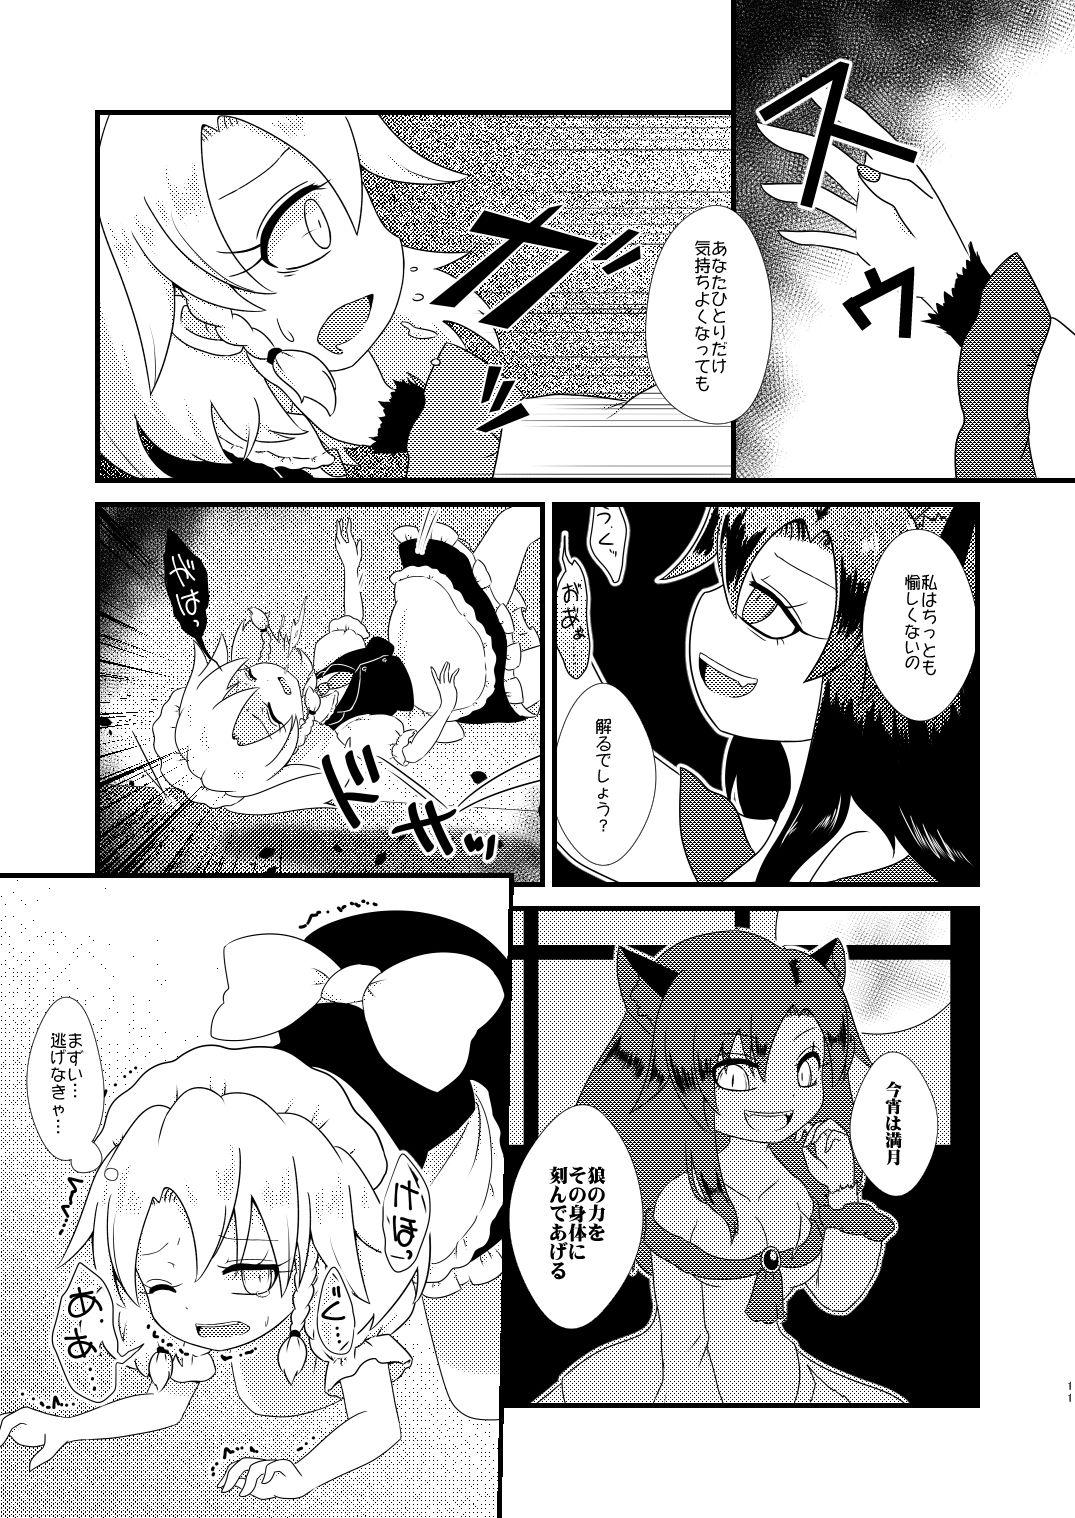 18 Year Old Porn ルーディ・リリー - Touhou project Nudes - Page 10